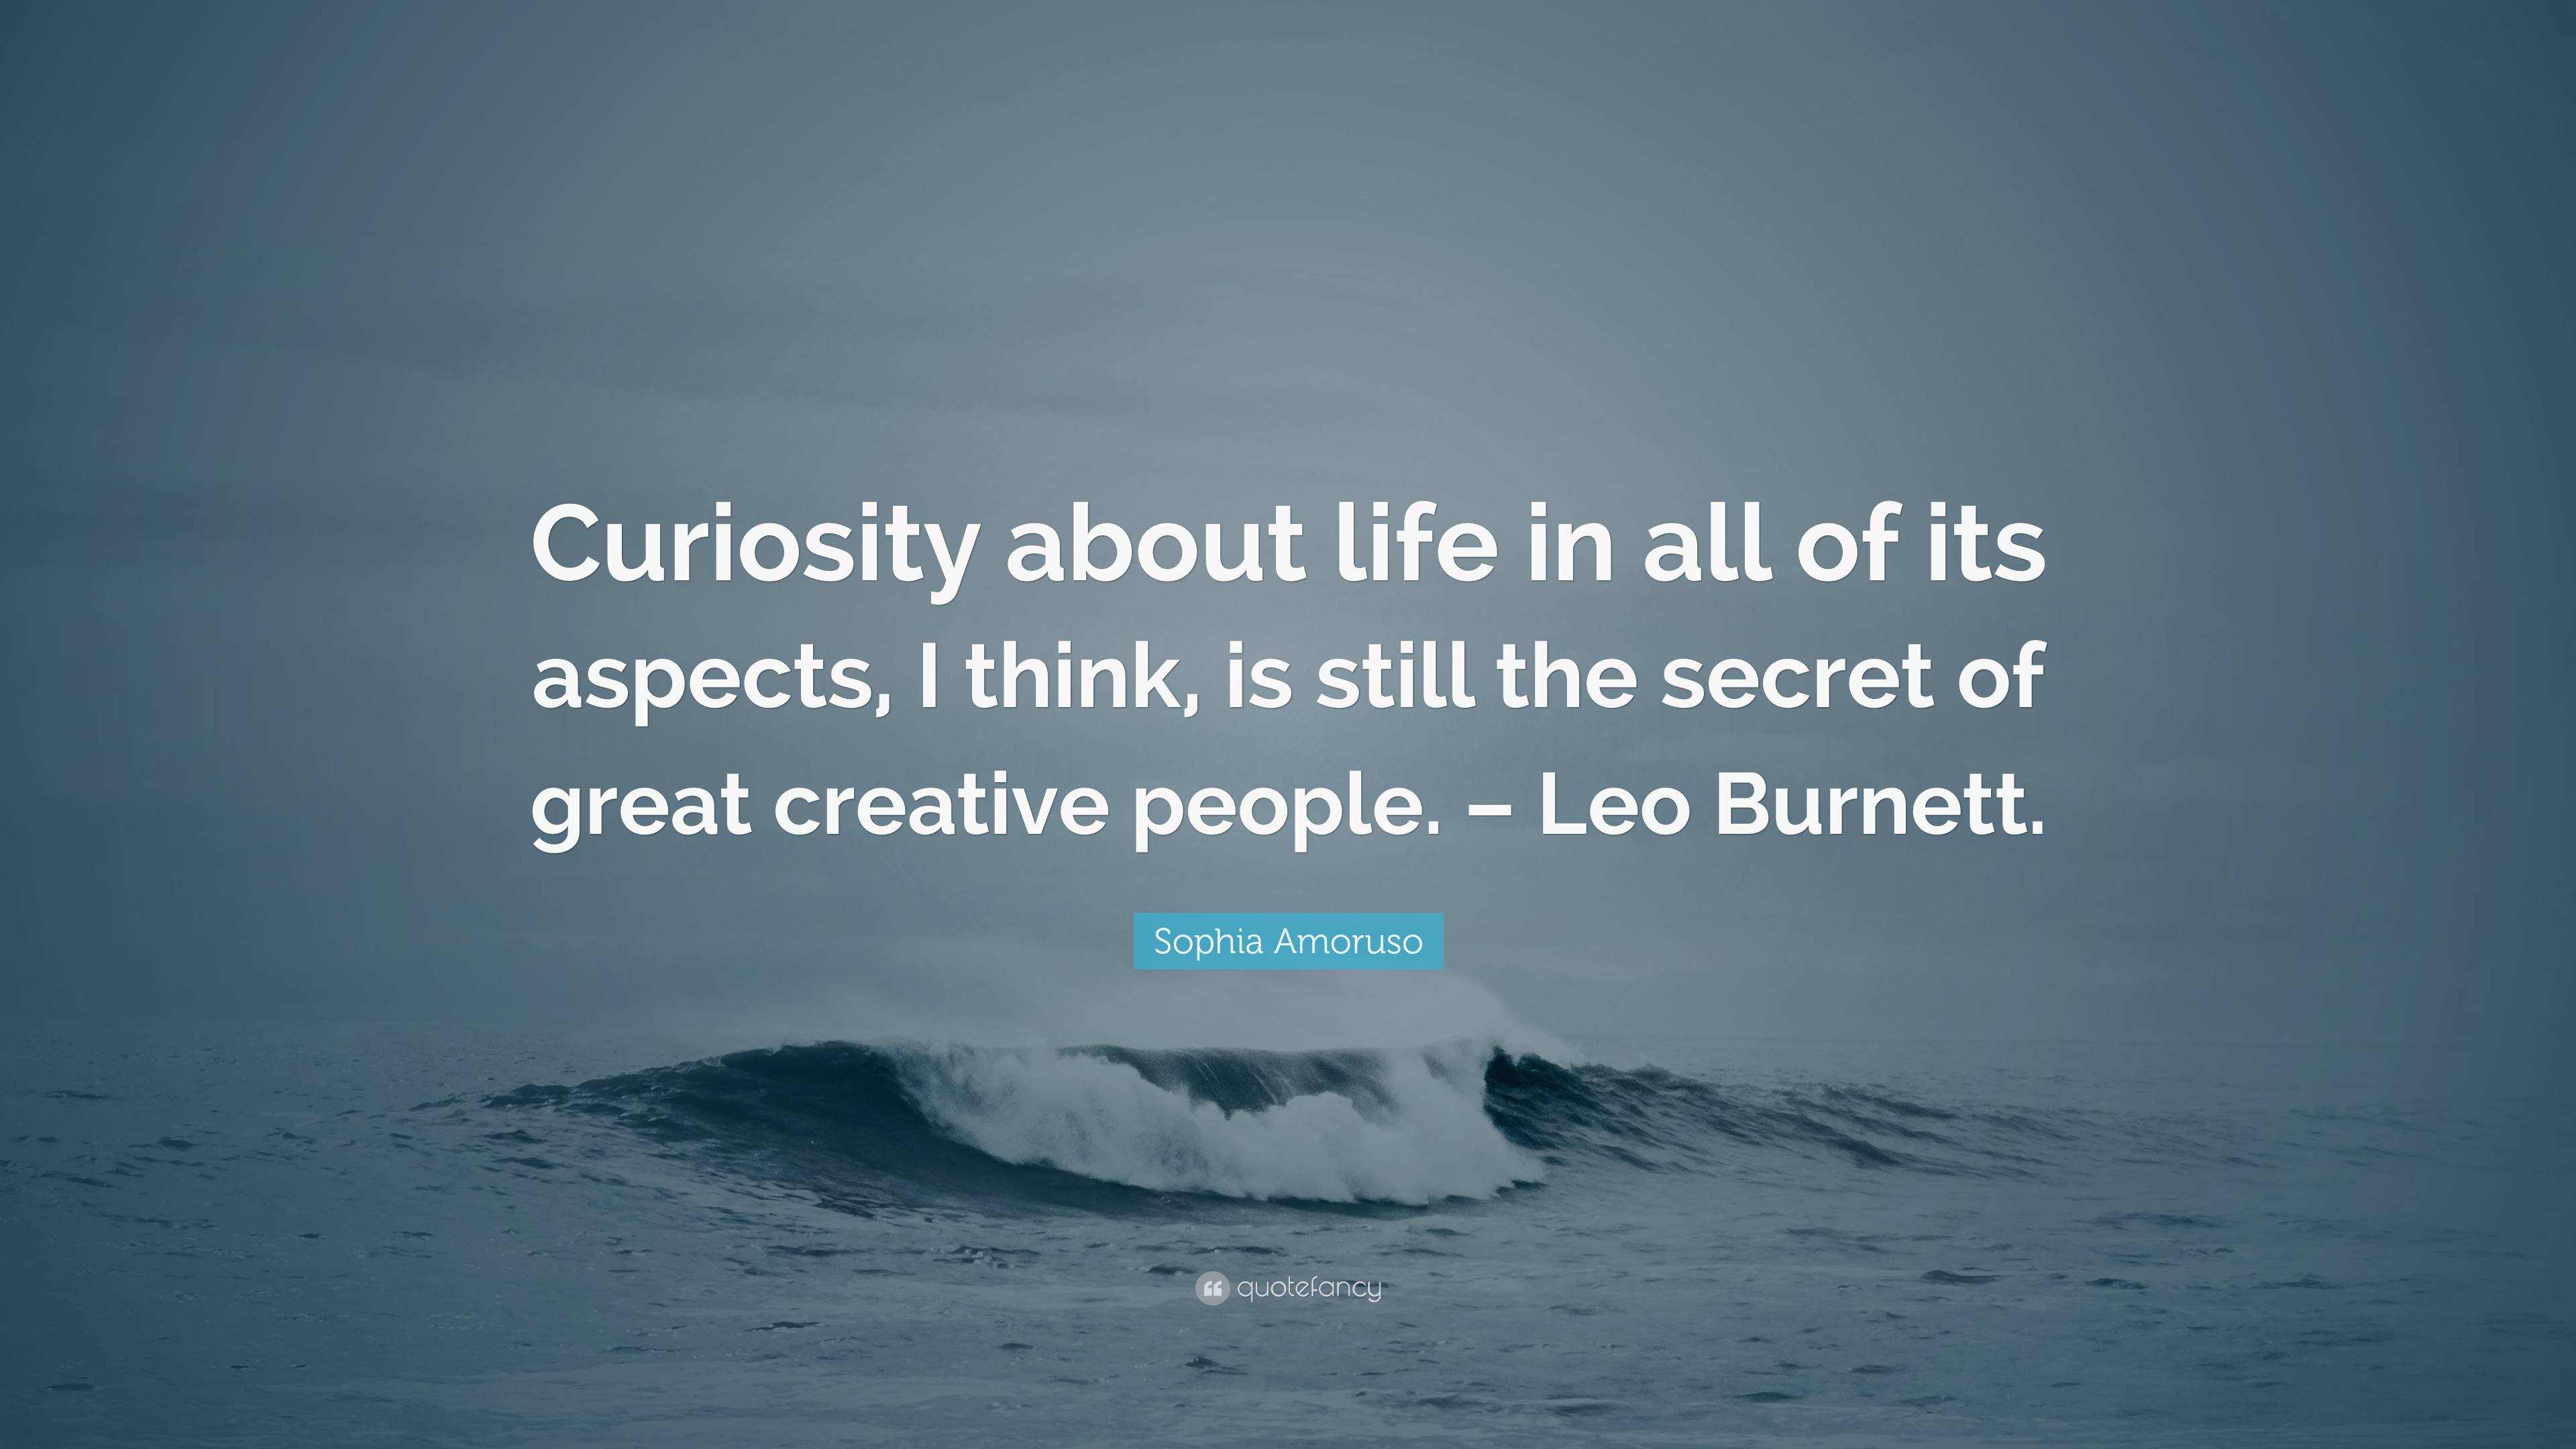 Sophia Amoruso Quote: “Curiosity about life in all of its aspects, I ...